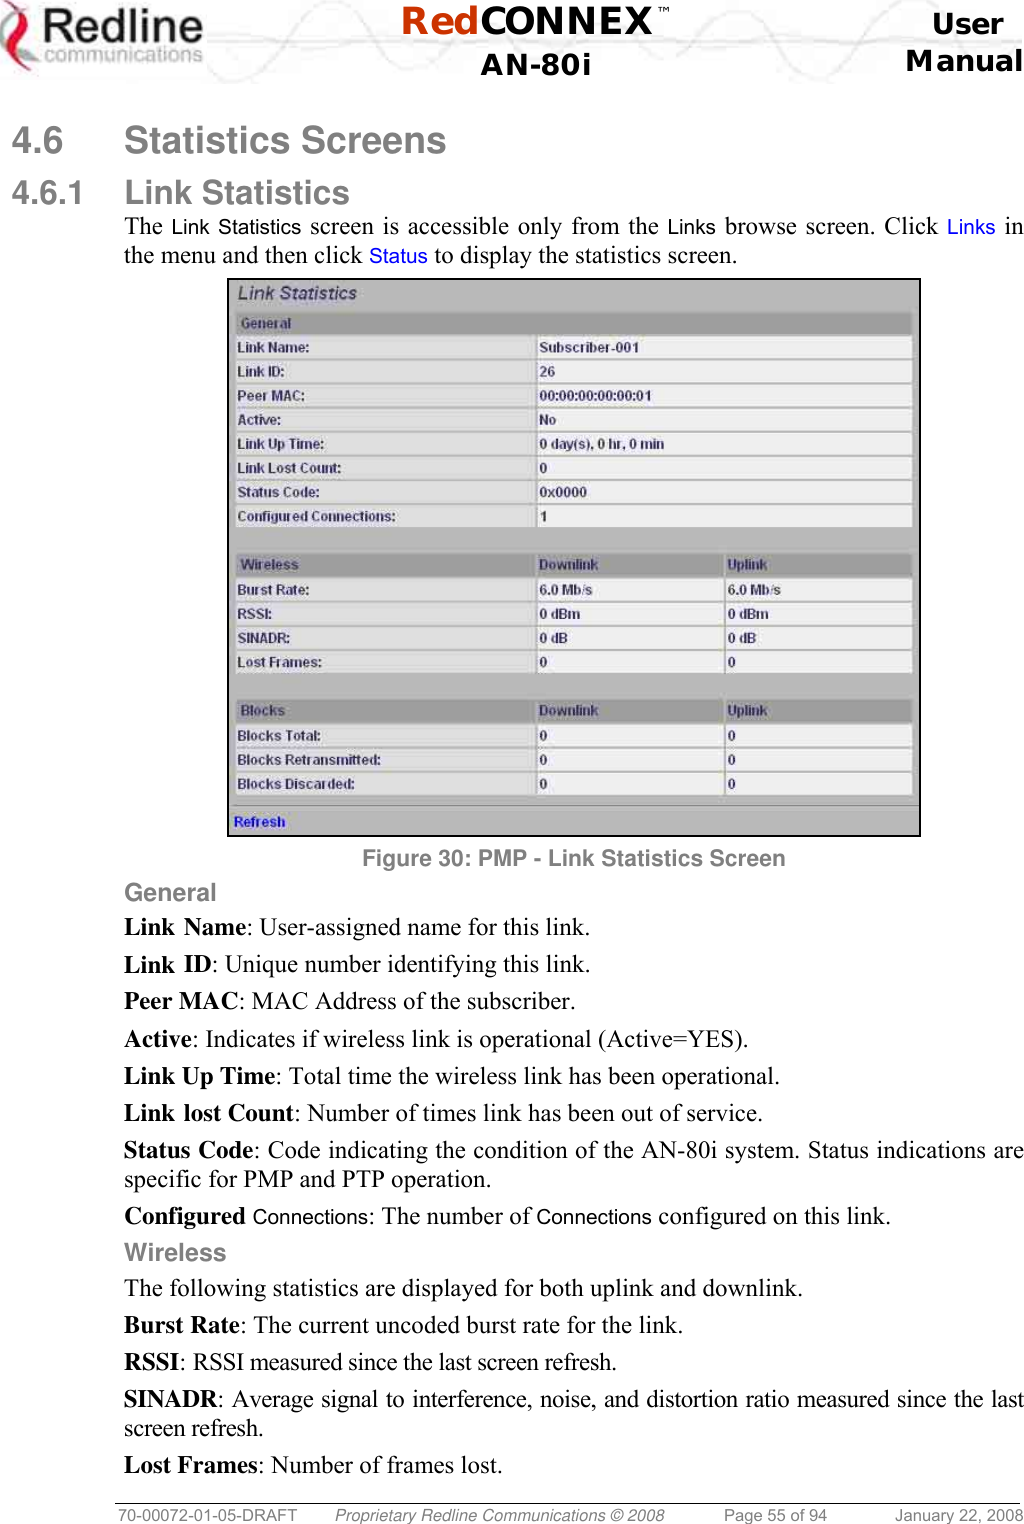  RedCONNEX™    User  AN-80i Manual  70-00072-01-05-DRAFT  Proprietary Redline Communications © 2008  Page 55 of 94  January 22, 2008  4.6 Statistics Screens 4.6.1 Link Statistics The Link Statistics screen is accessible only from the Links browse screen. Click Links in the menu and then click Status to display the statistics screen.   Figure 30: PMP - Link Statistics Screen General Link Name: User-assigned name for this link. Link ID: Unique number identifying this link. Peer MAC: MAC Address of the subscriber. Active: Indicates if wireless link is operational (Active=YES). Link Up Time: Total time the wireless link has been operational. Link lost Count: Number of times link has been out of service. Status Code: Code indicating the condition of the AN-80i system. Status indications are specific for PMP and PTP operation.  Configured Connections: The number of Connections configured on this link. Wireless The following statistics are displayed for both uplink and downlink. Burst Rate: The current uncoded burst rate for the link. RSSI: RSSI measured since the last screen refresh. SINADR: Average signal to interference, noise, and distortion ratio measured since the last screen refresh. Lost Frames: Number of frames lost. 